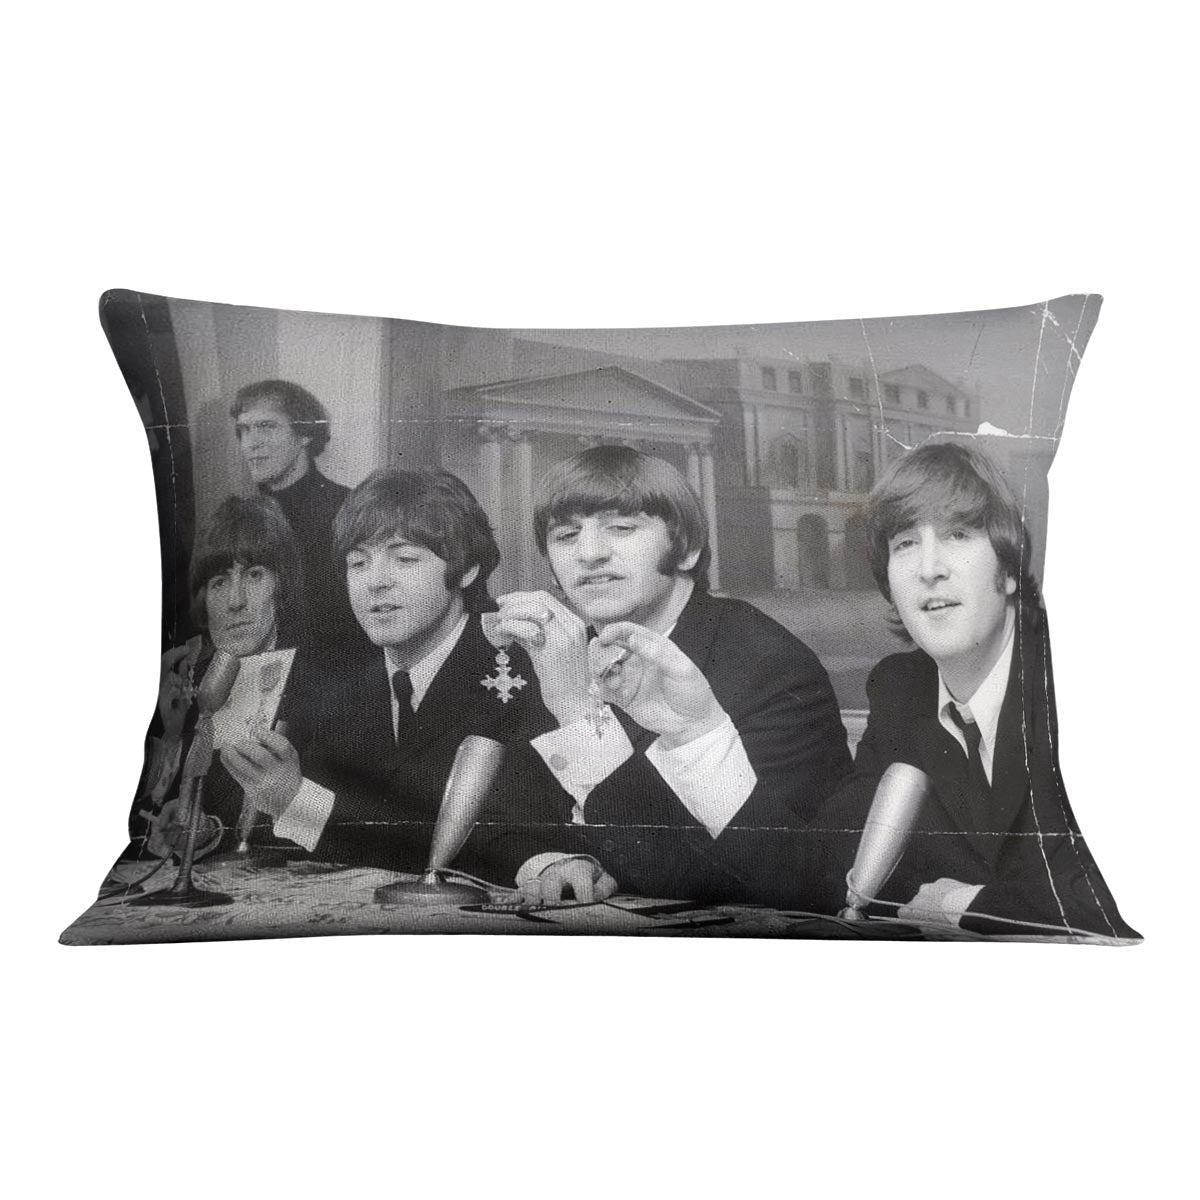 The Beatles at a press conference with their MBEs Cushion